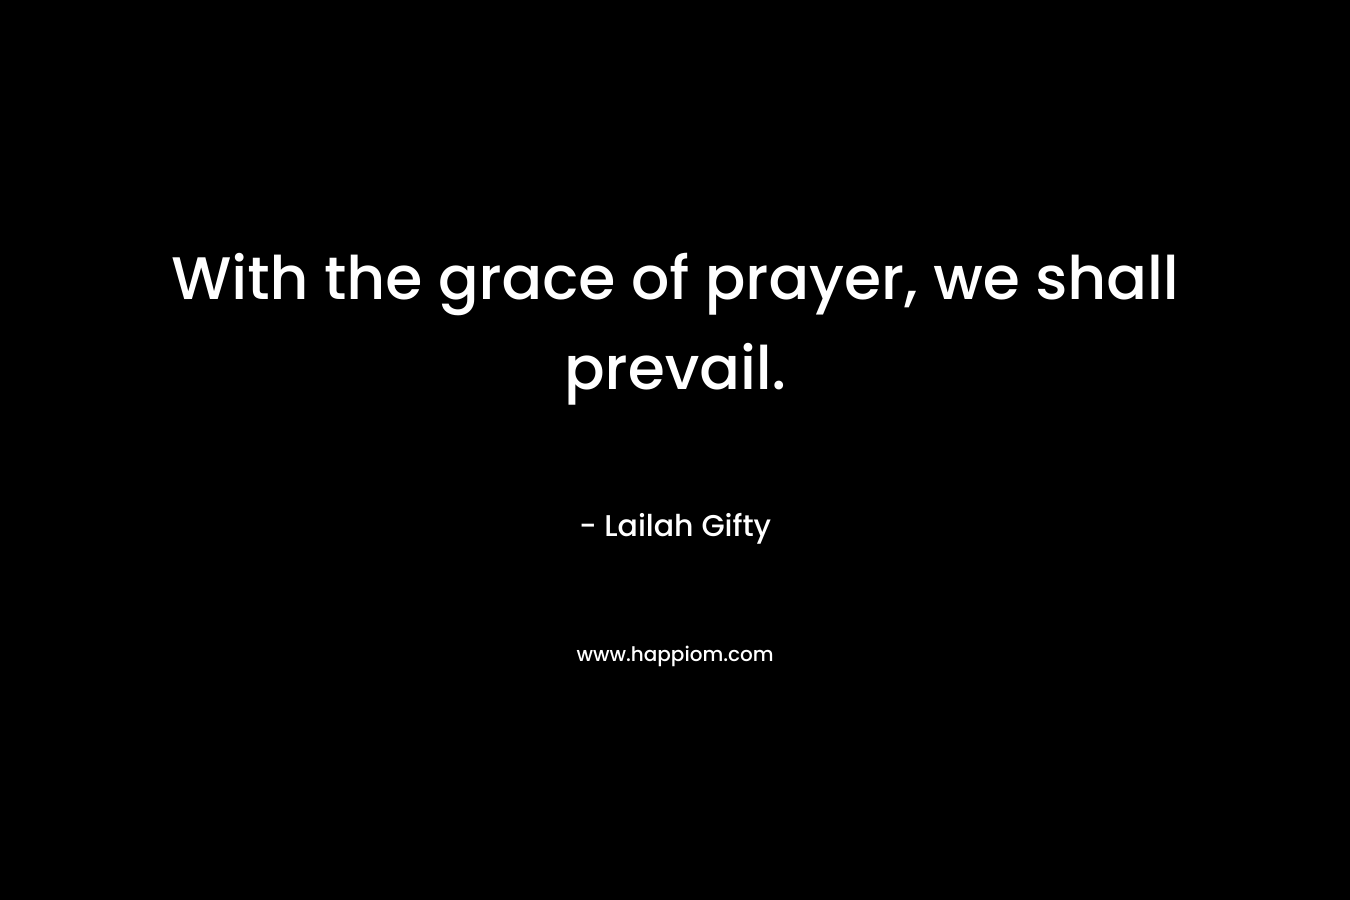 With the grace of prayer, we shall prevail.